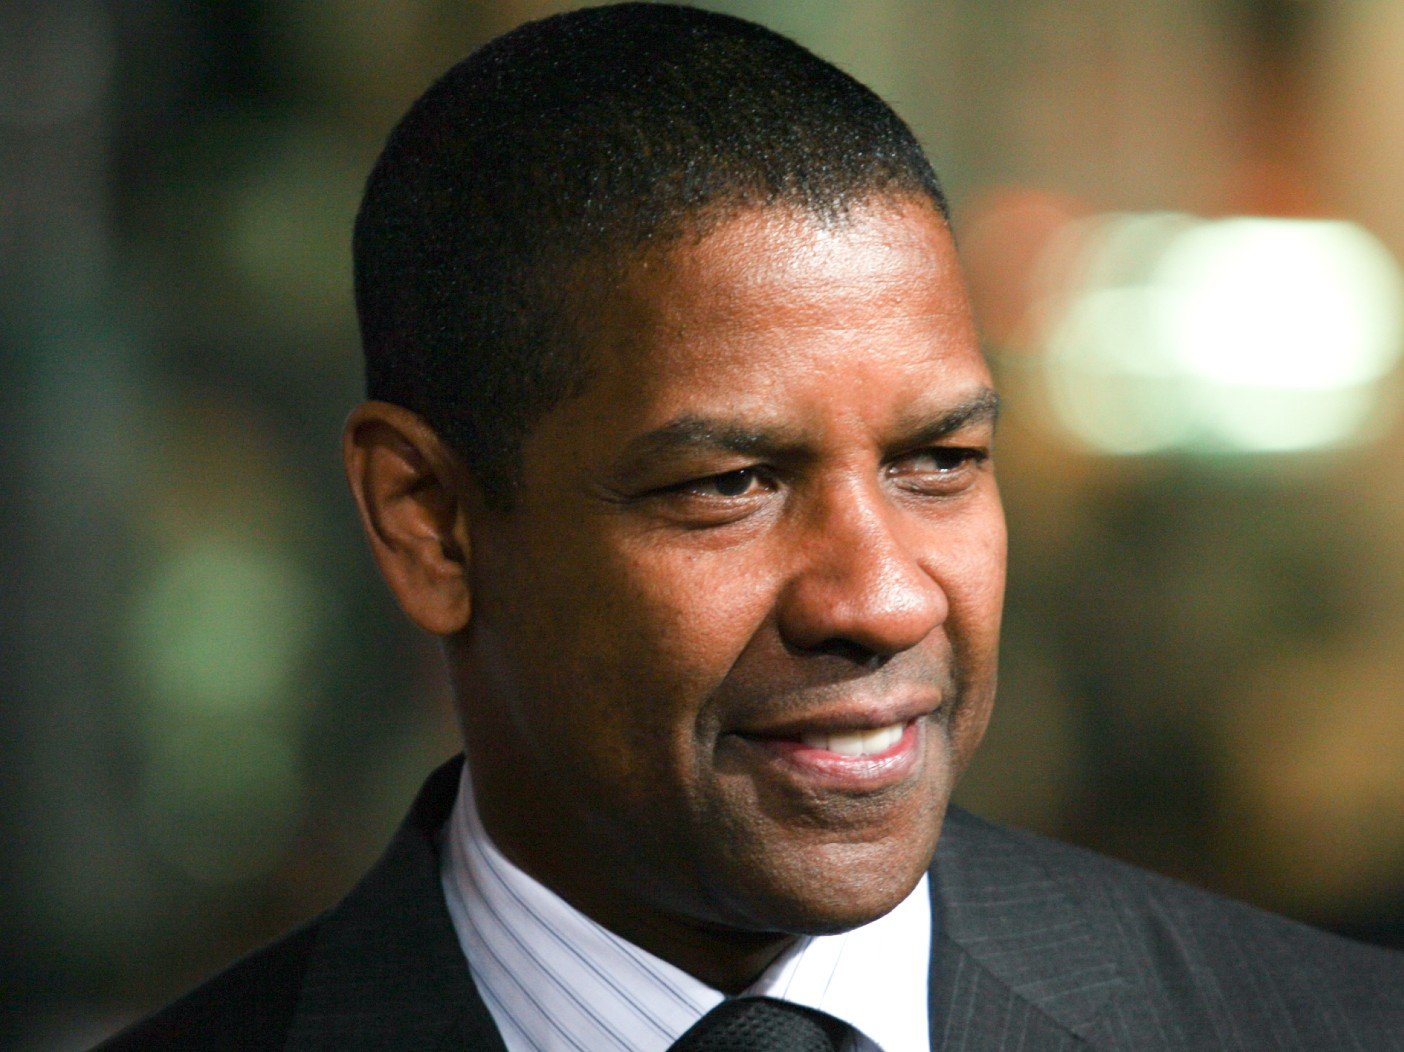 Denzel Washington’s Smile Used To Look Entirely Different, Take A Look